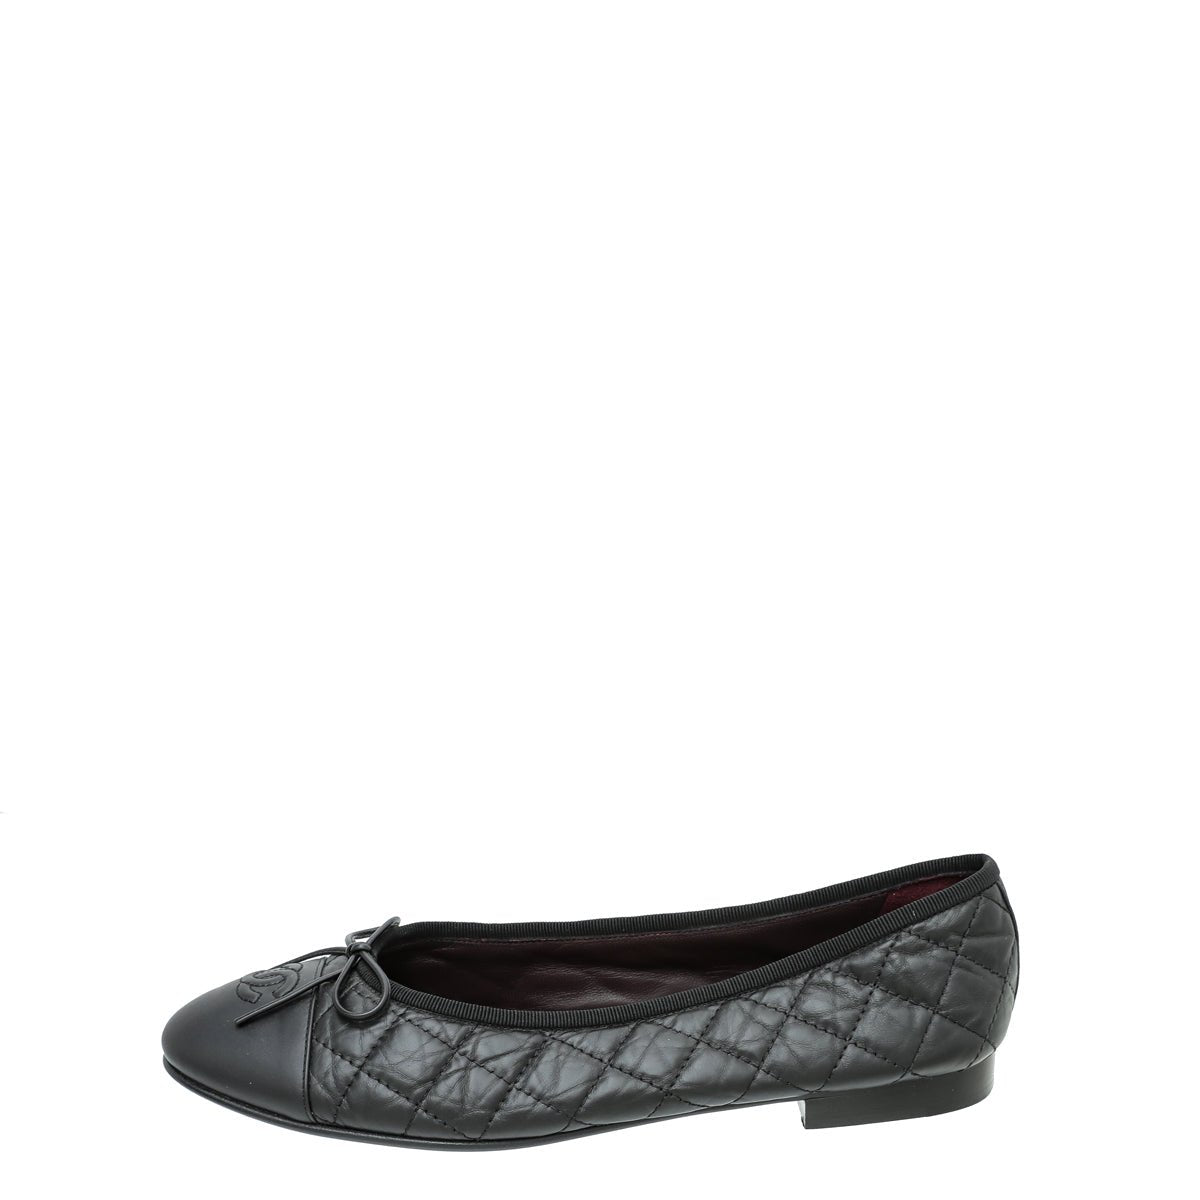 Chanel - Chanel Black Cap toe Quilted Ballerina Flats 39.5 | The Closet